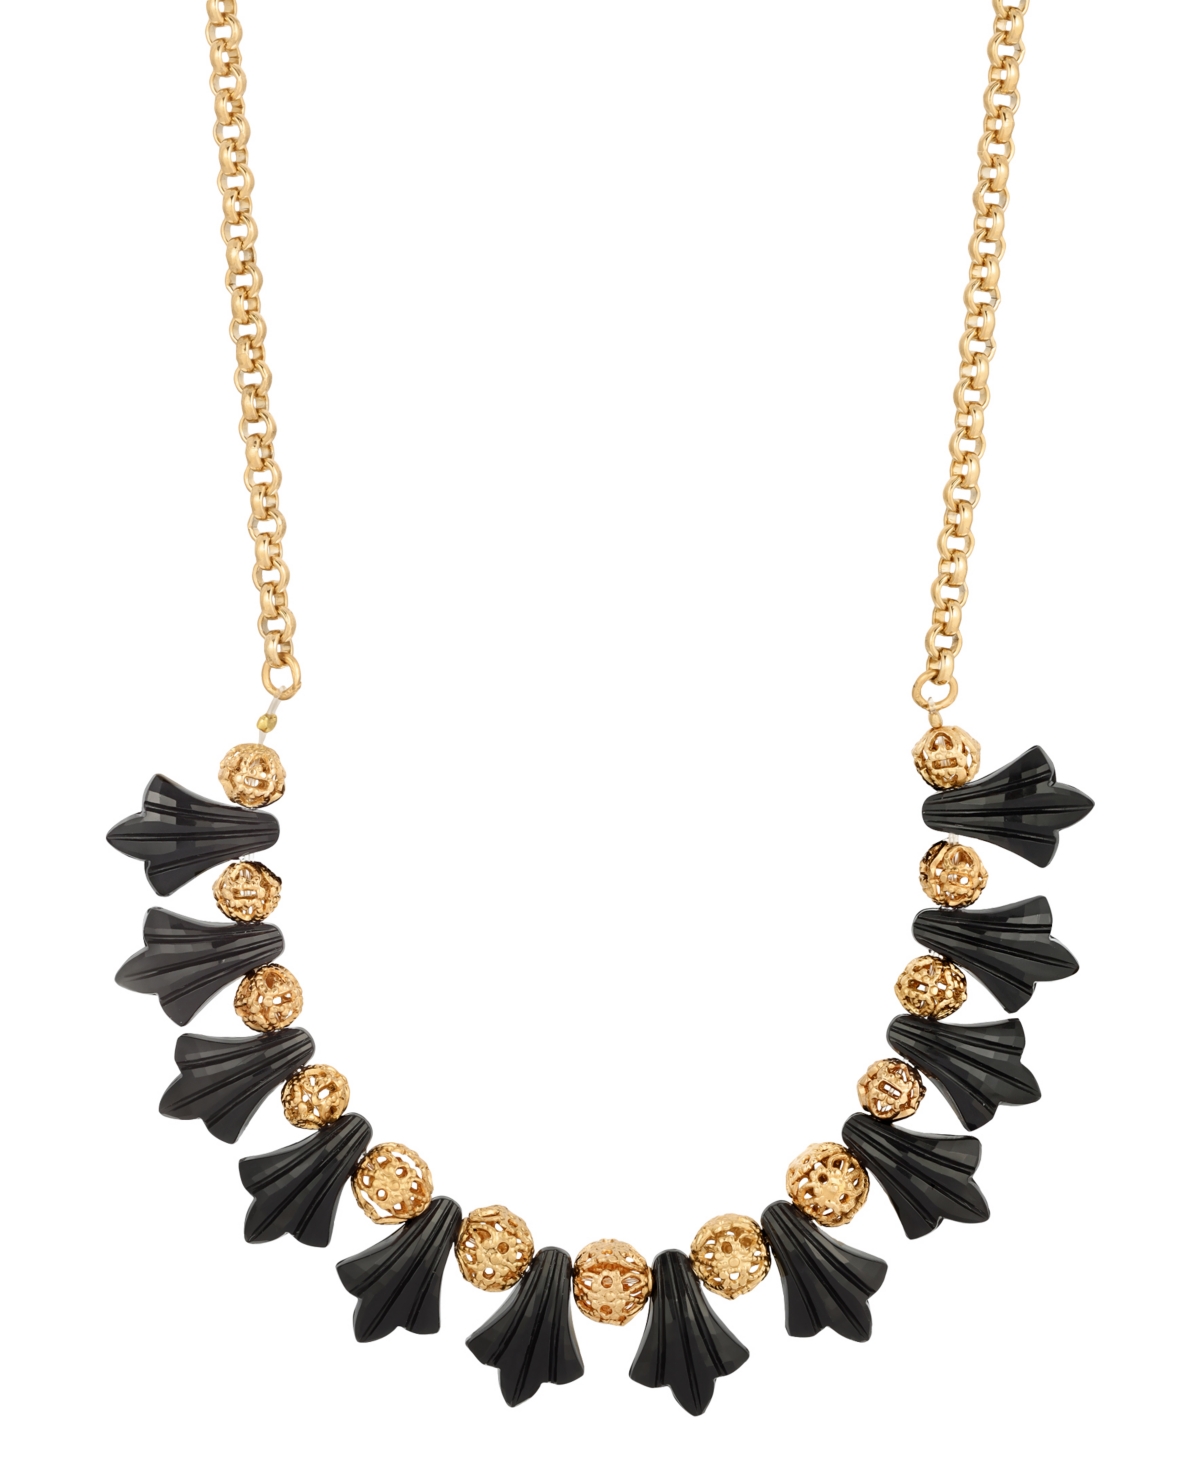 2028 Gold-tone Jet Acrylic Beads Adjustable Necklace In Black